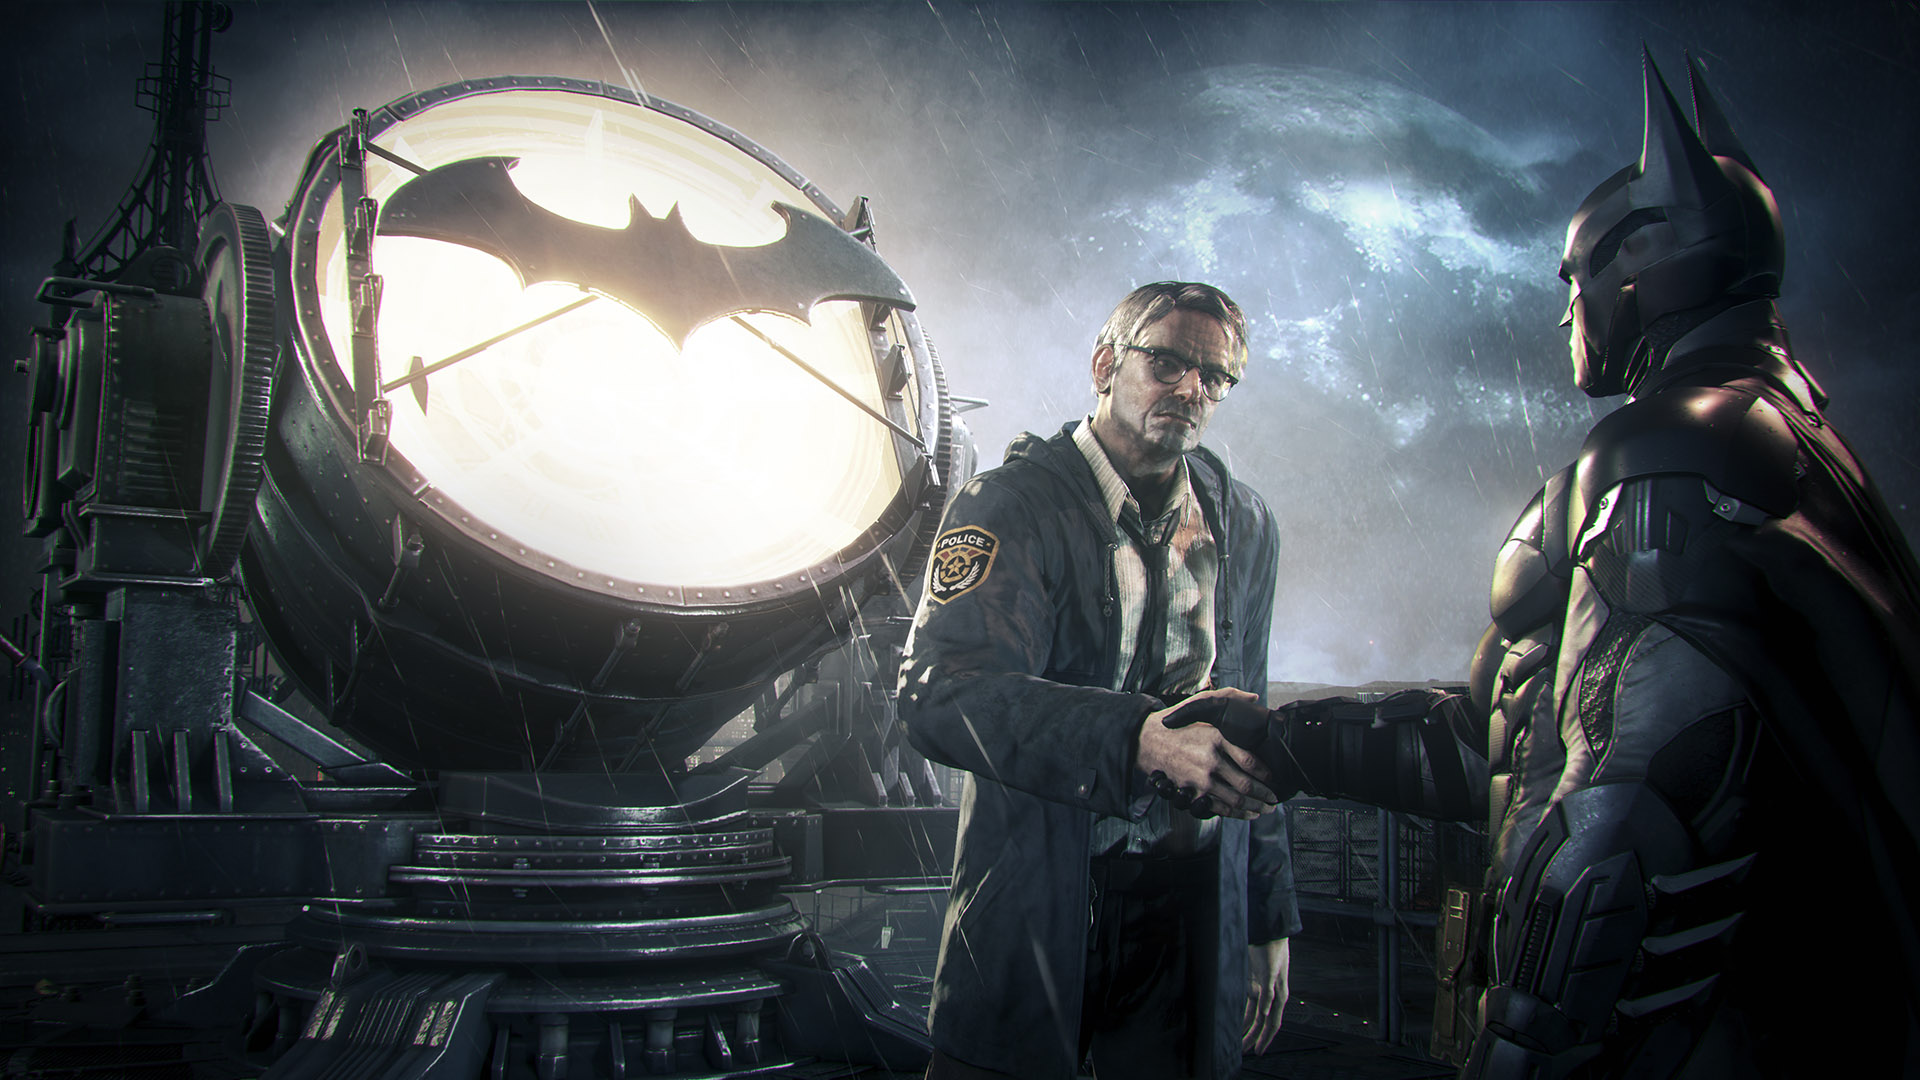 Gotham Knights New Game Plus: What Carries Over and Changes? -  GameRevolution